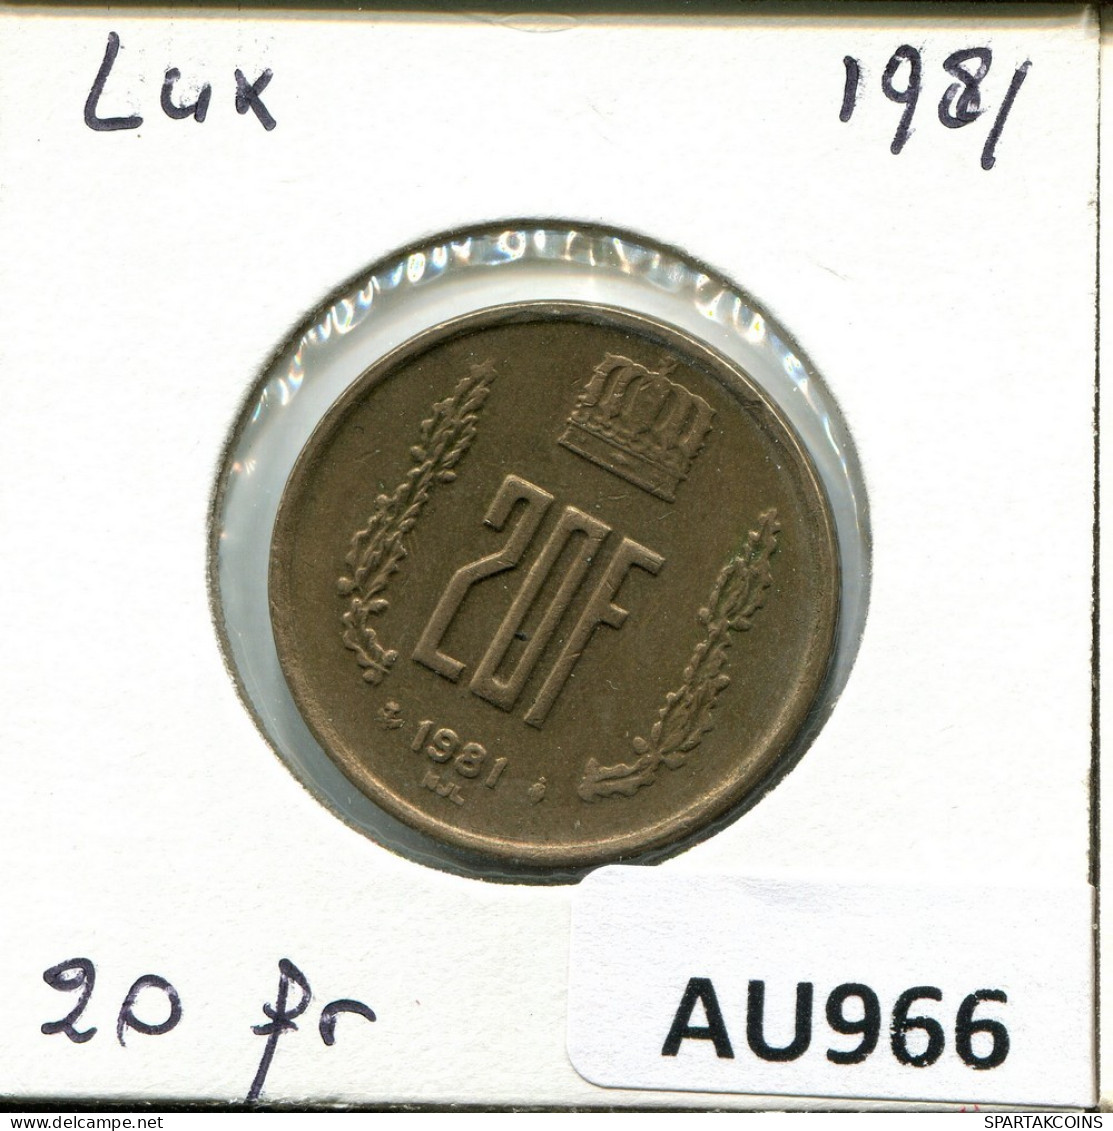 20 FRANCS 1981 LUXEMBOURG Coin #AU966.U.A - Luxembourg